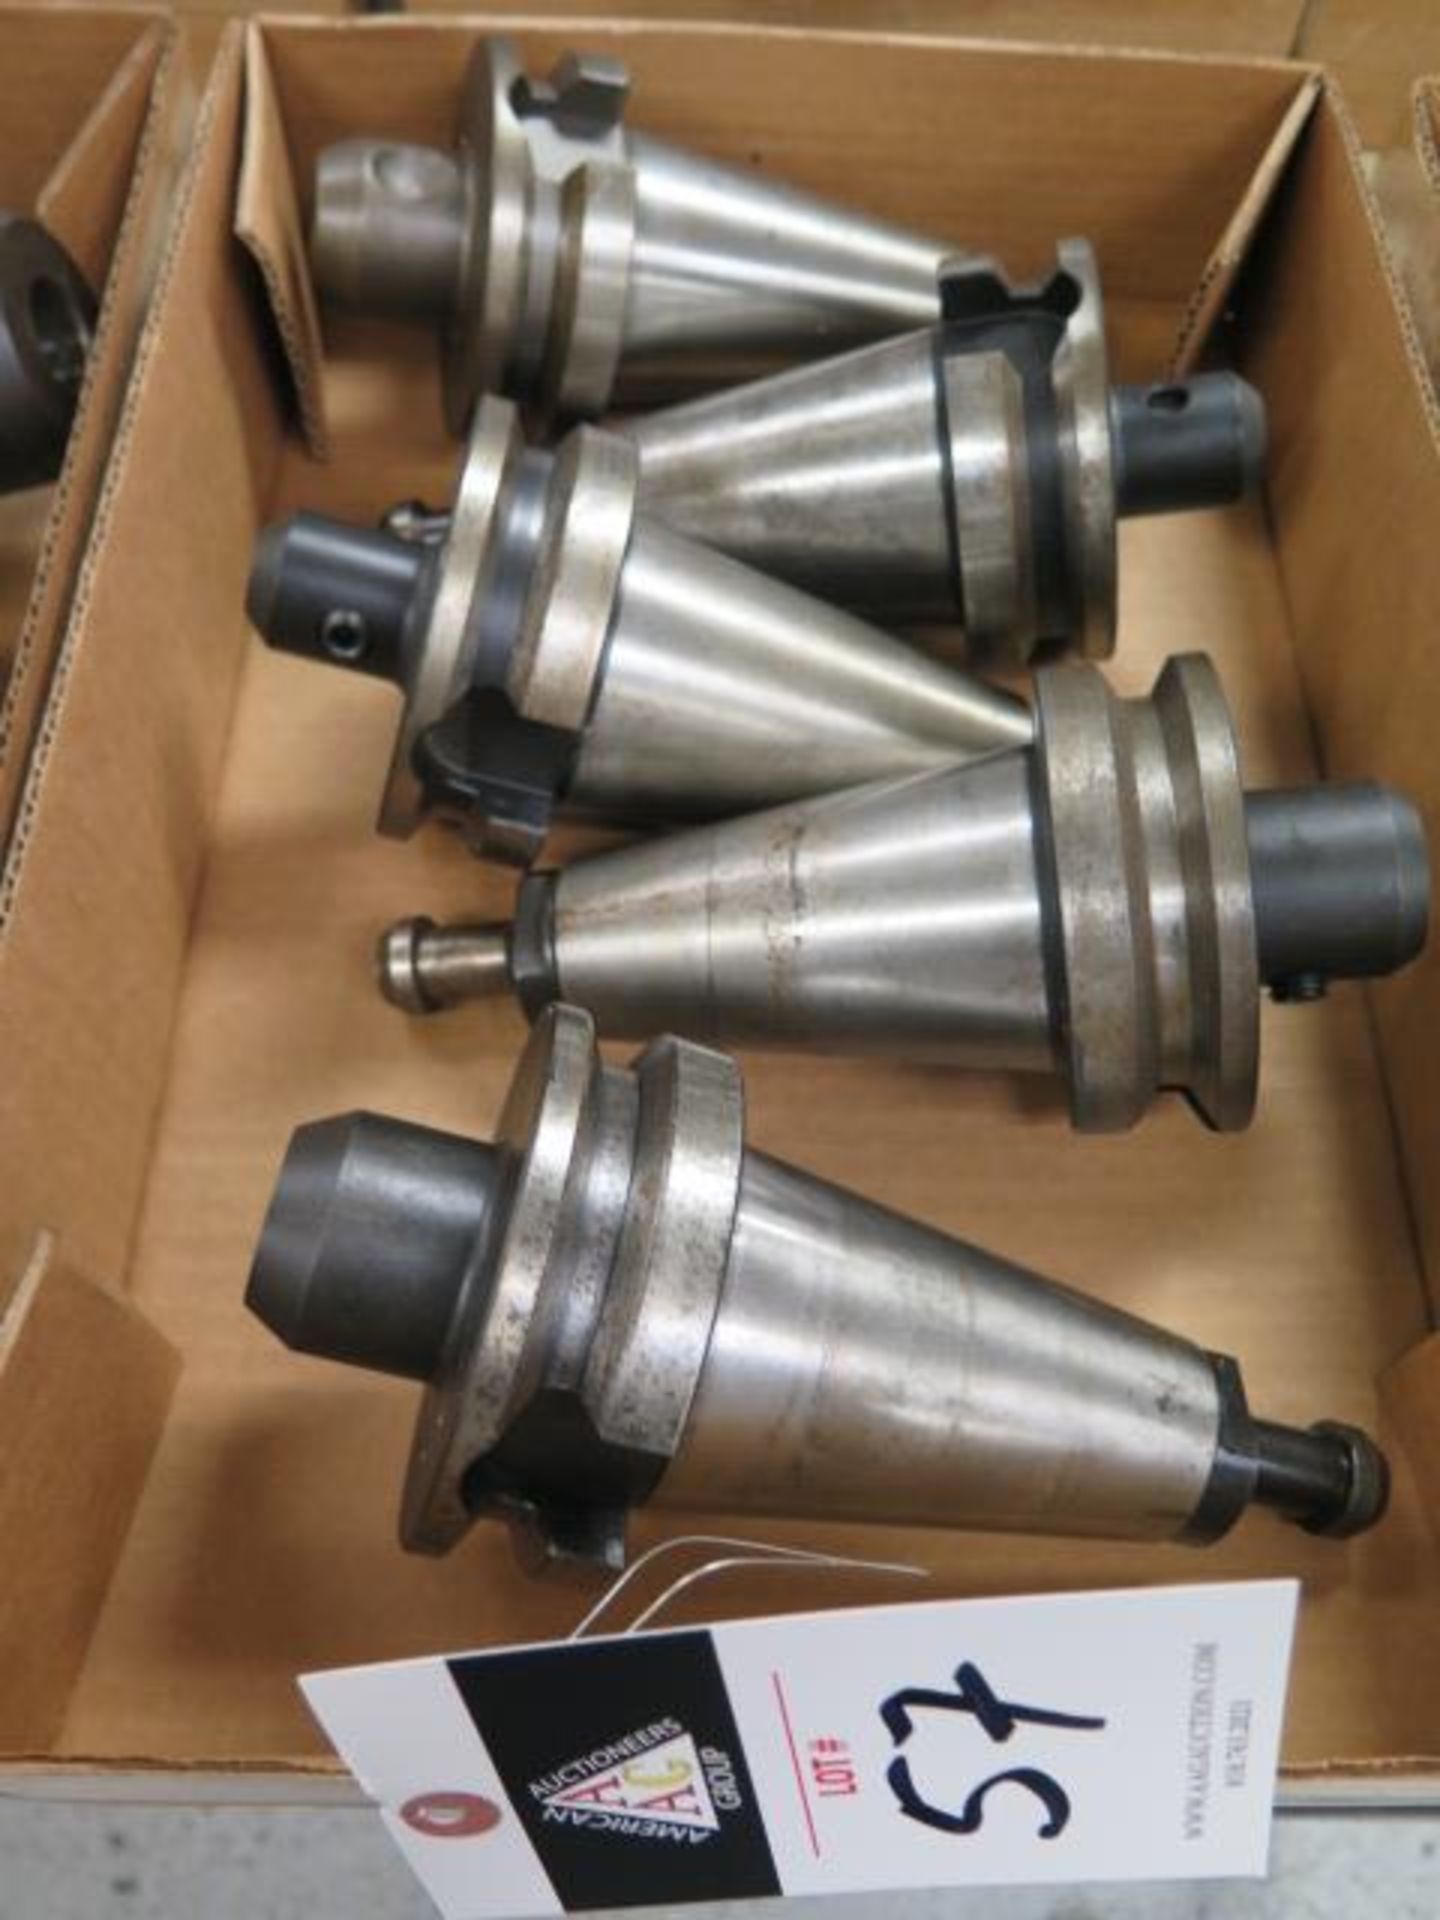 BT-50 Taper Tooling (5) (SOLD AS-IS - NO WARRANTY) (Located @ 2229 Ringwood Ave. San Jose)